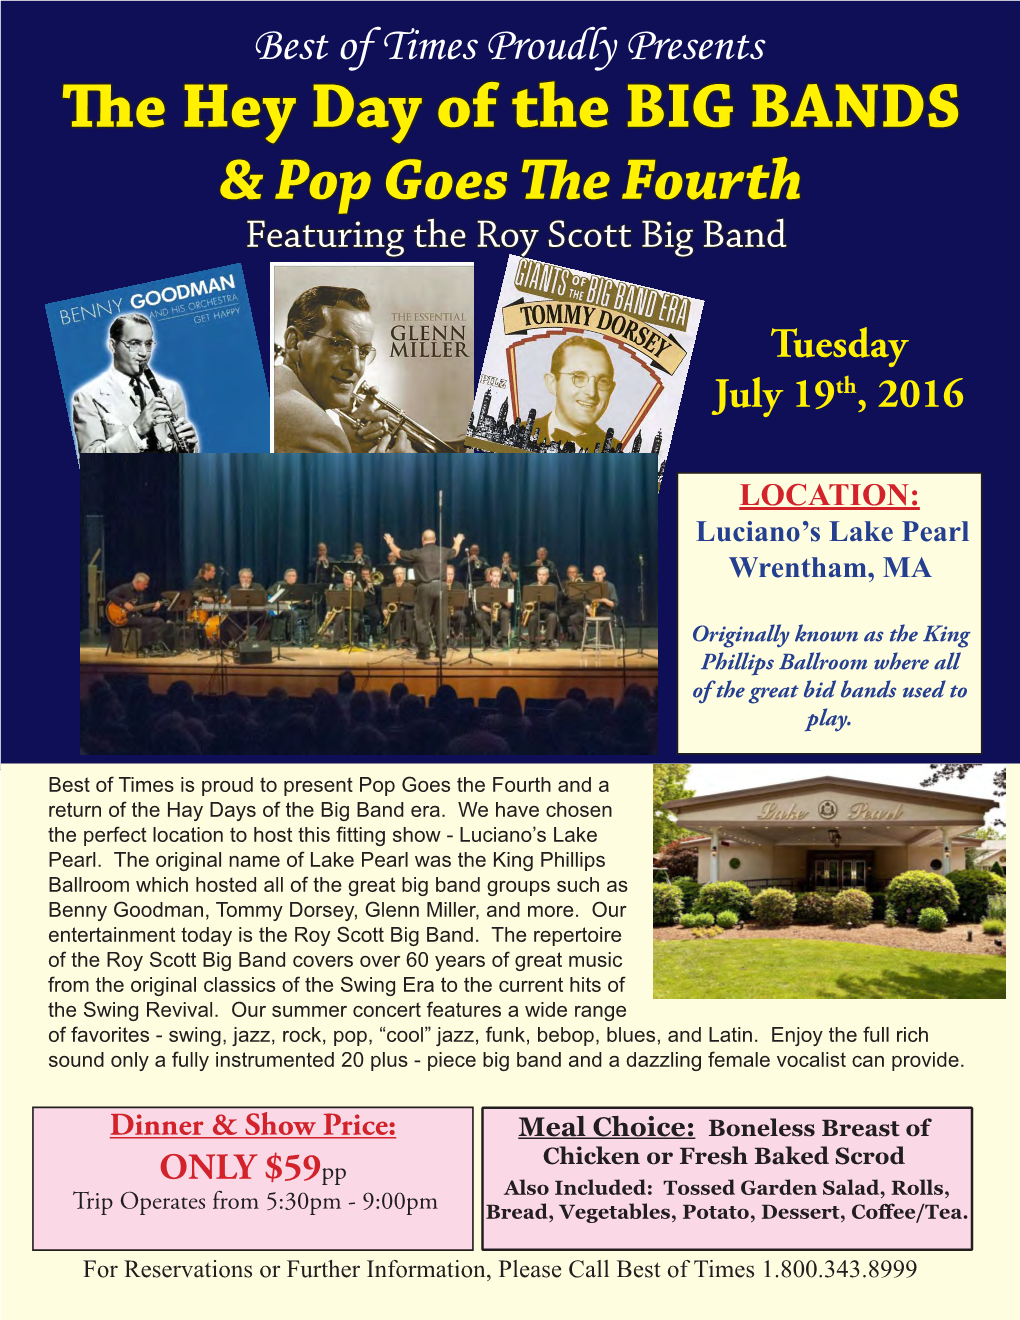 The Hey Day of the BIG BANDS & Pop Goes the Fourth Featuring the Roy Scott Big Band